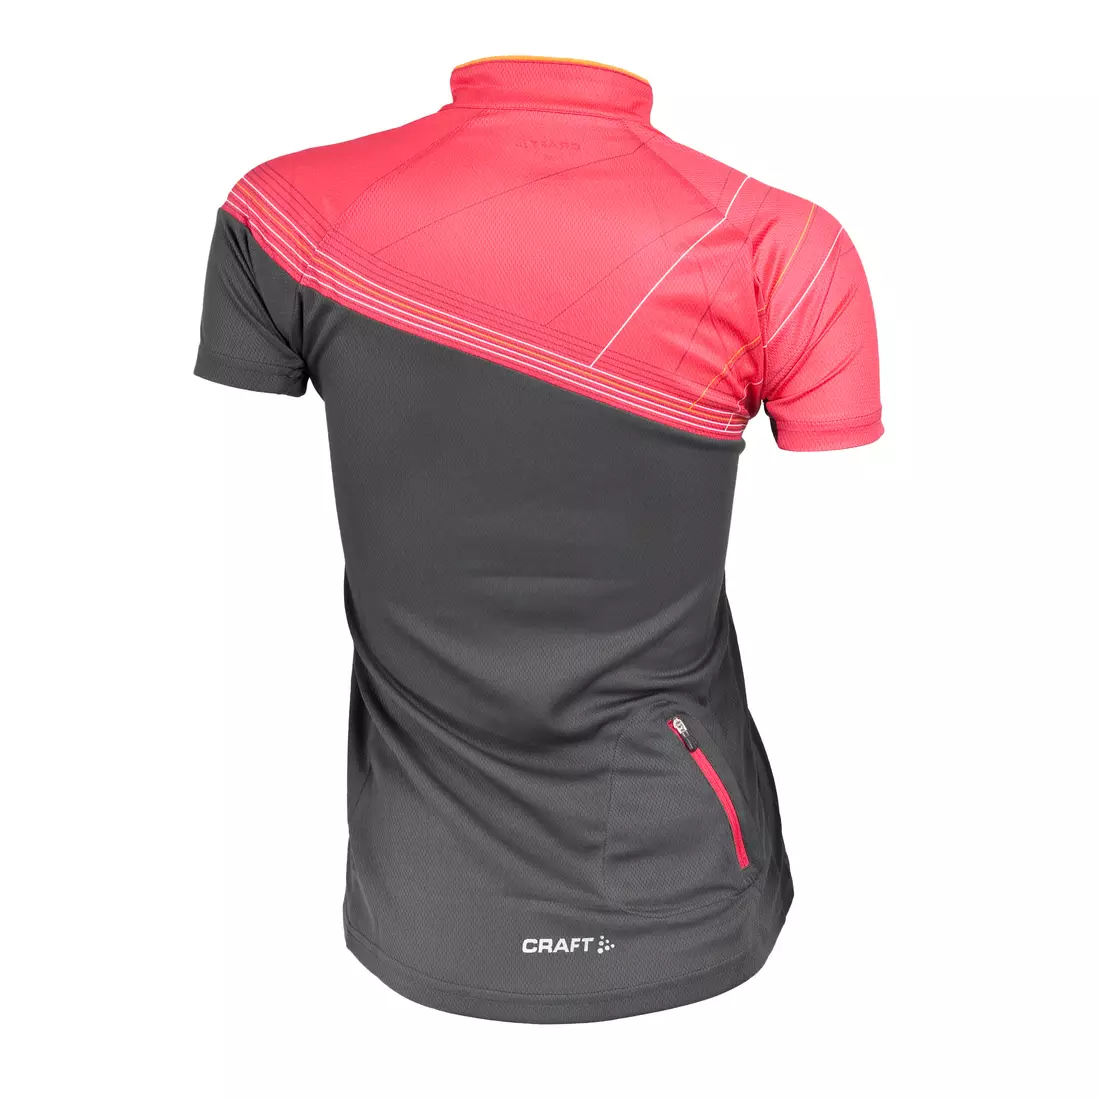 CRAFT Performance Bike Loose Fit Women's Cycling Jersey 1901936-2477